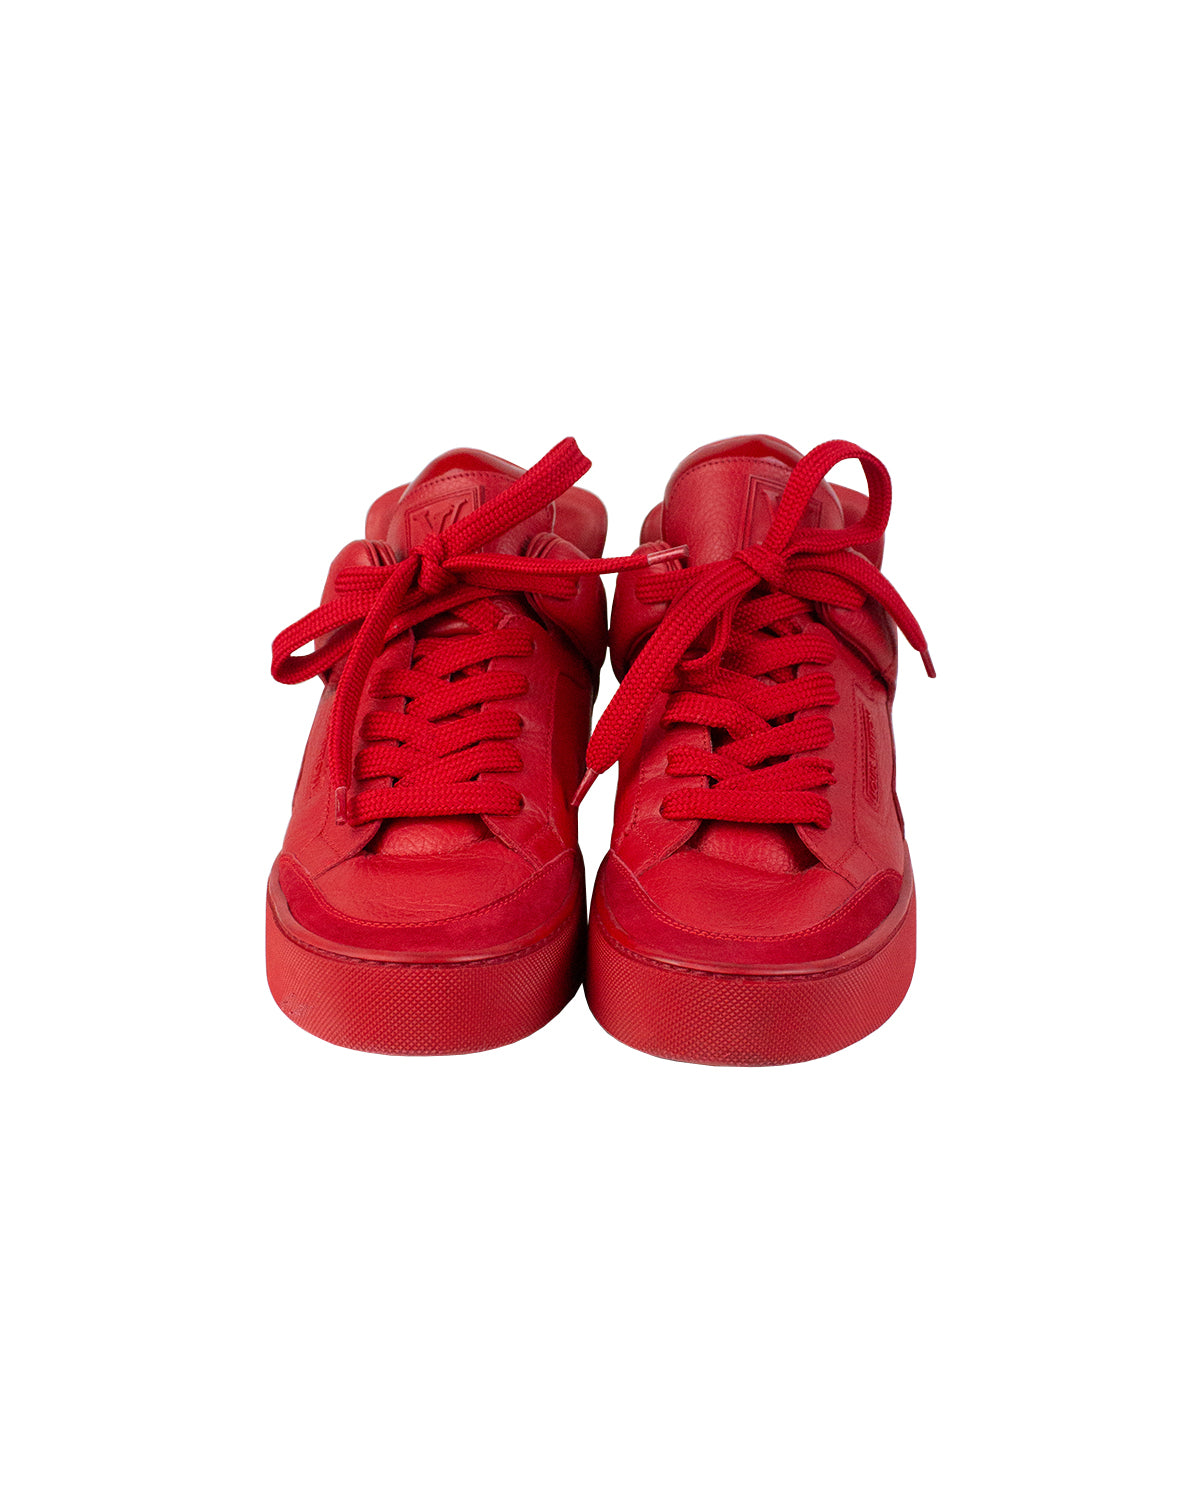 Kanye West x Louis Vuitton - Red on Red 